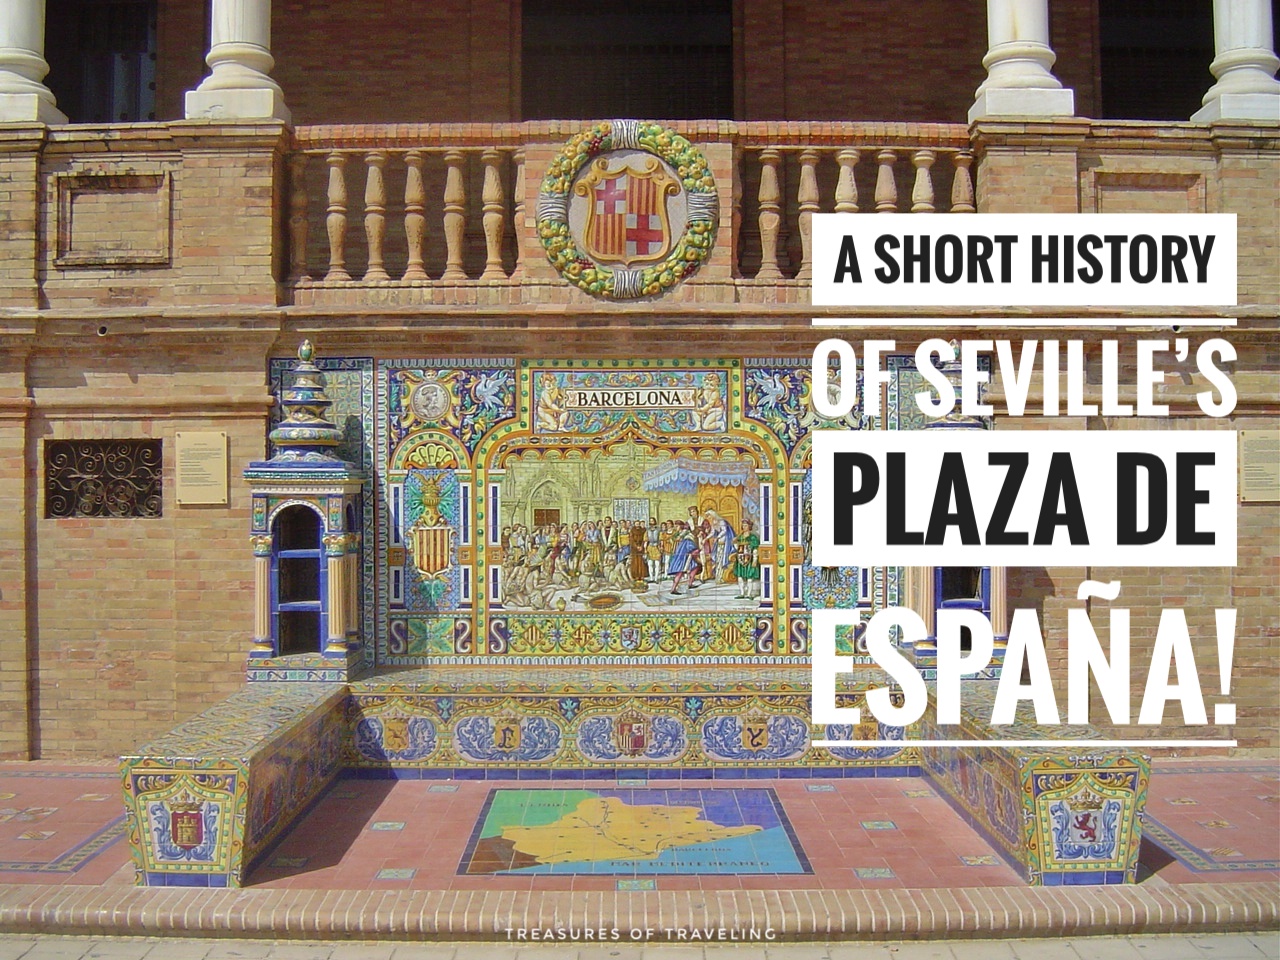 Seville’s famous and iconic Plaza de España was built for the Ibero-American Exhibition World Fair of 1929. While the plaza was once the centrepiece of the fair, it is now one of Seville’s biggest tourist attractions which has even been used in the filming of huge hollywood movies.